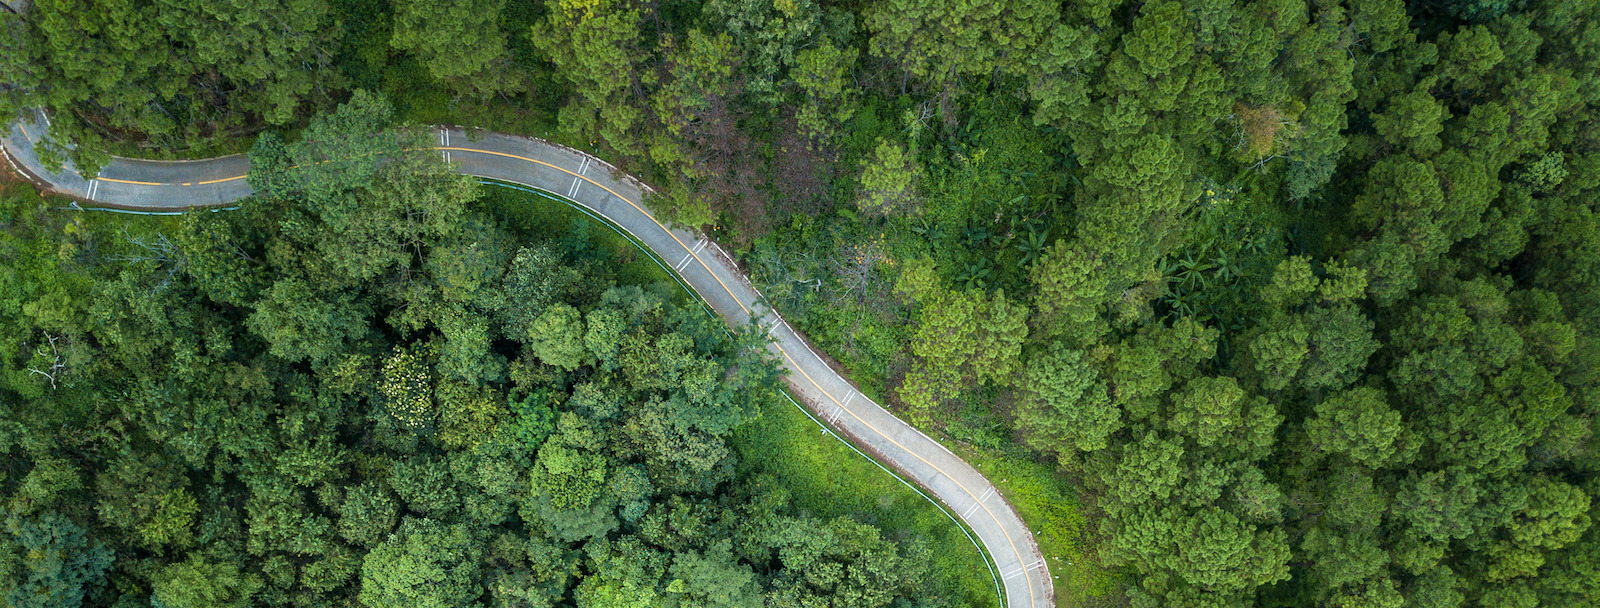 Top aerial view of a green forest landscape with a meandering road in the middle